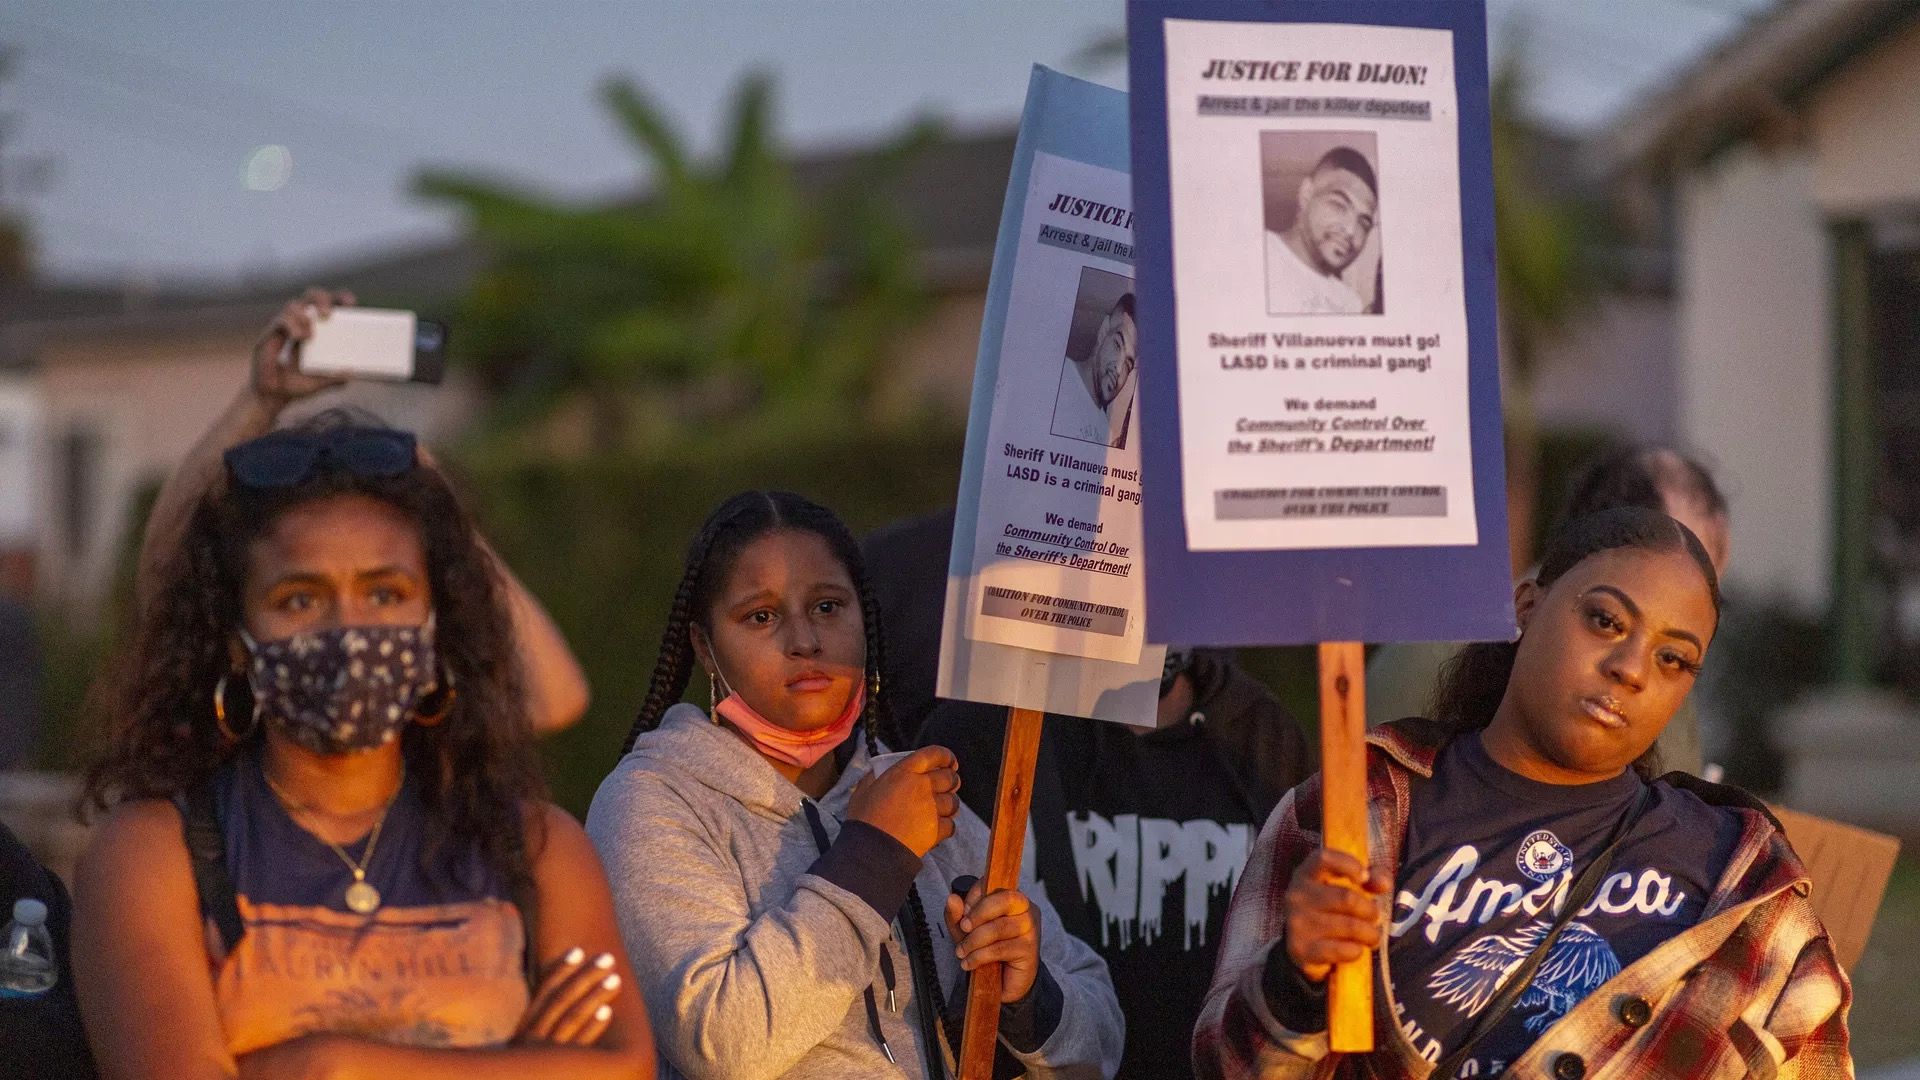 Women are seen protesting following the shooting of Dijon Kizzee by Los Angeles Sheriff's deputies.